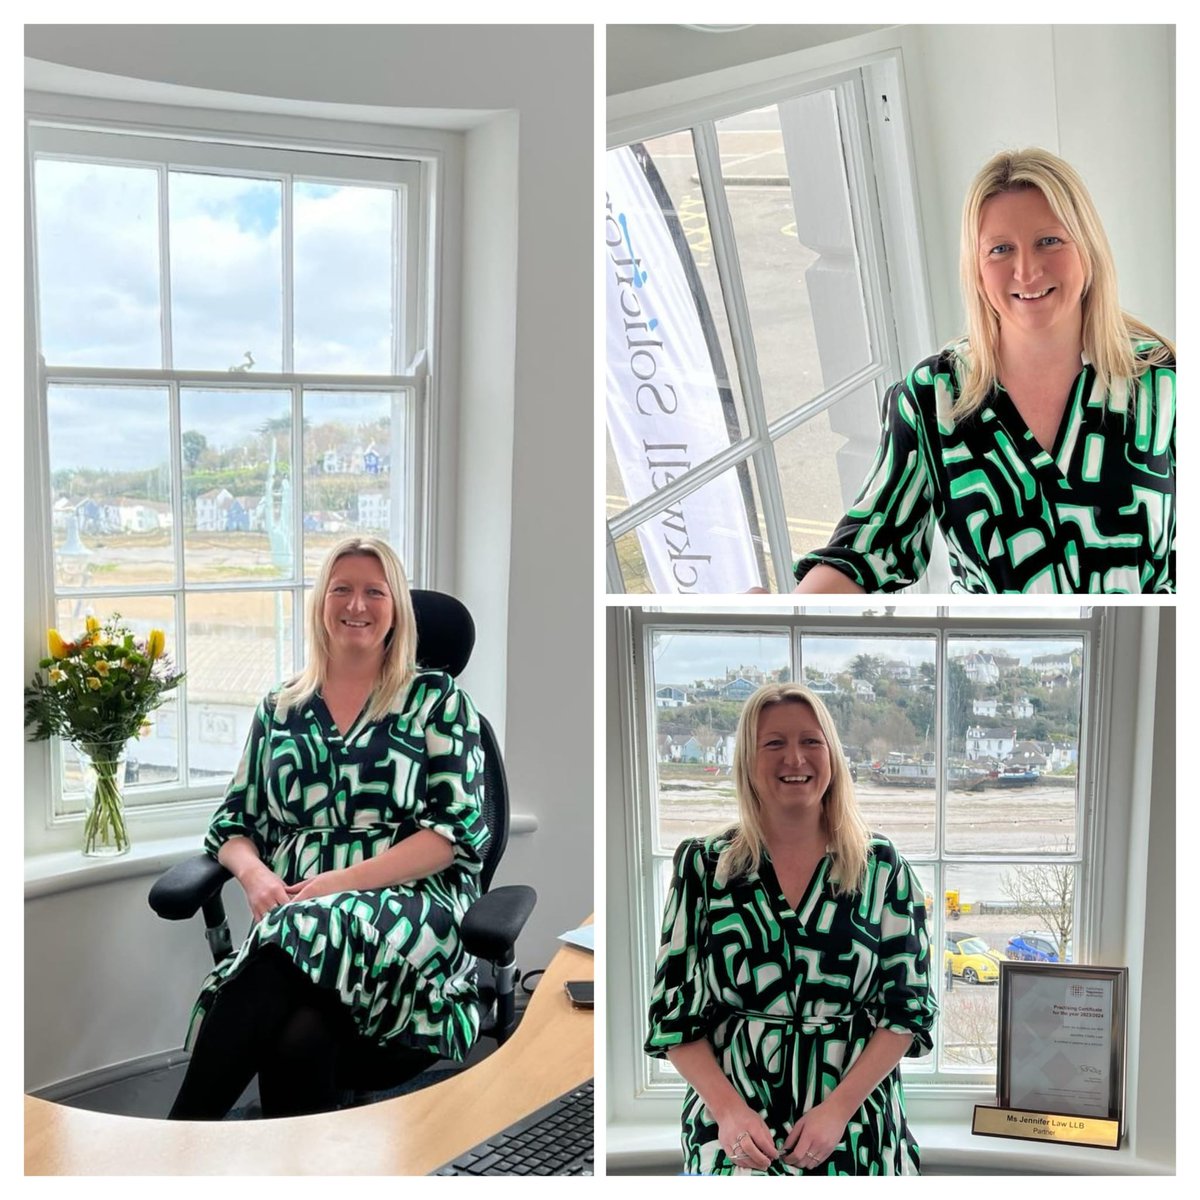 ⚖️ Meet Our Experts: starting with Jen Law, head of our Family Law Dept Jen is now serving clients at our new #Bideford office. Jen handles divorce, financial separation, cohabitation claims, relationship agreements, private law children cases, domestic abuse matters, and more.